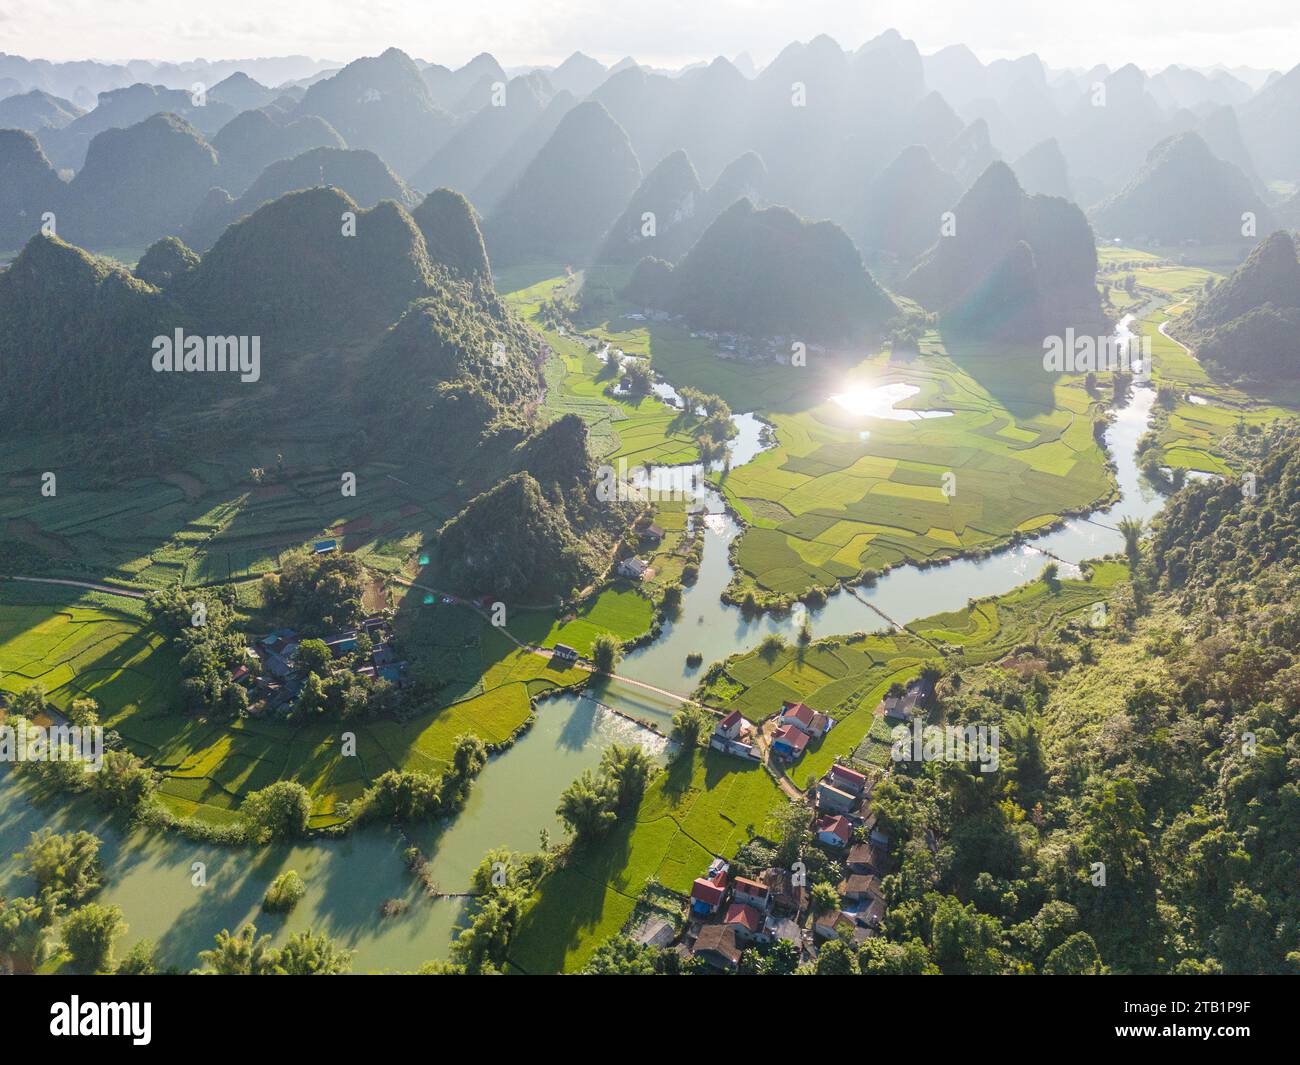 Aerial landscape in Phong Nam valley, an extreme scenery landscape at Cao bang province, Vietnam with river, nature, green rice fields. Travel and lan Stock Photo